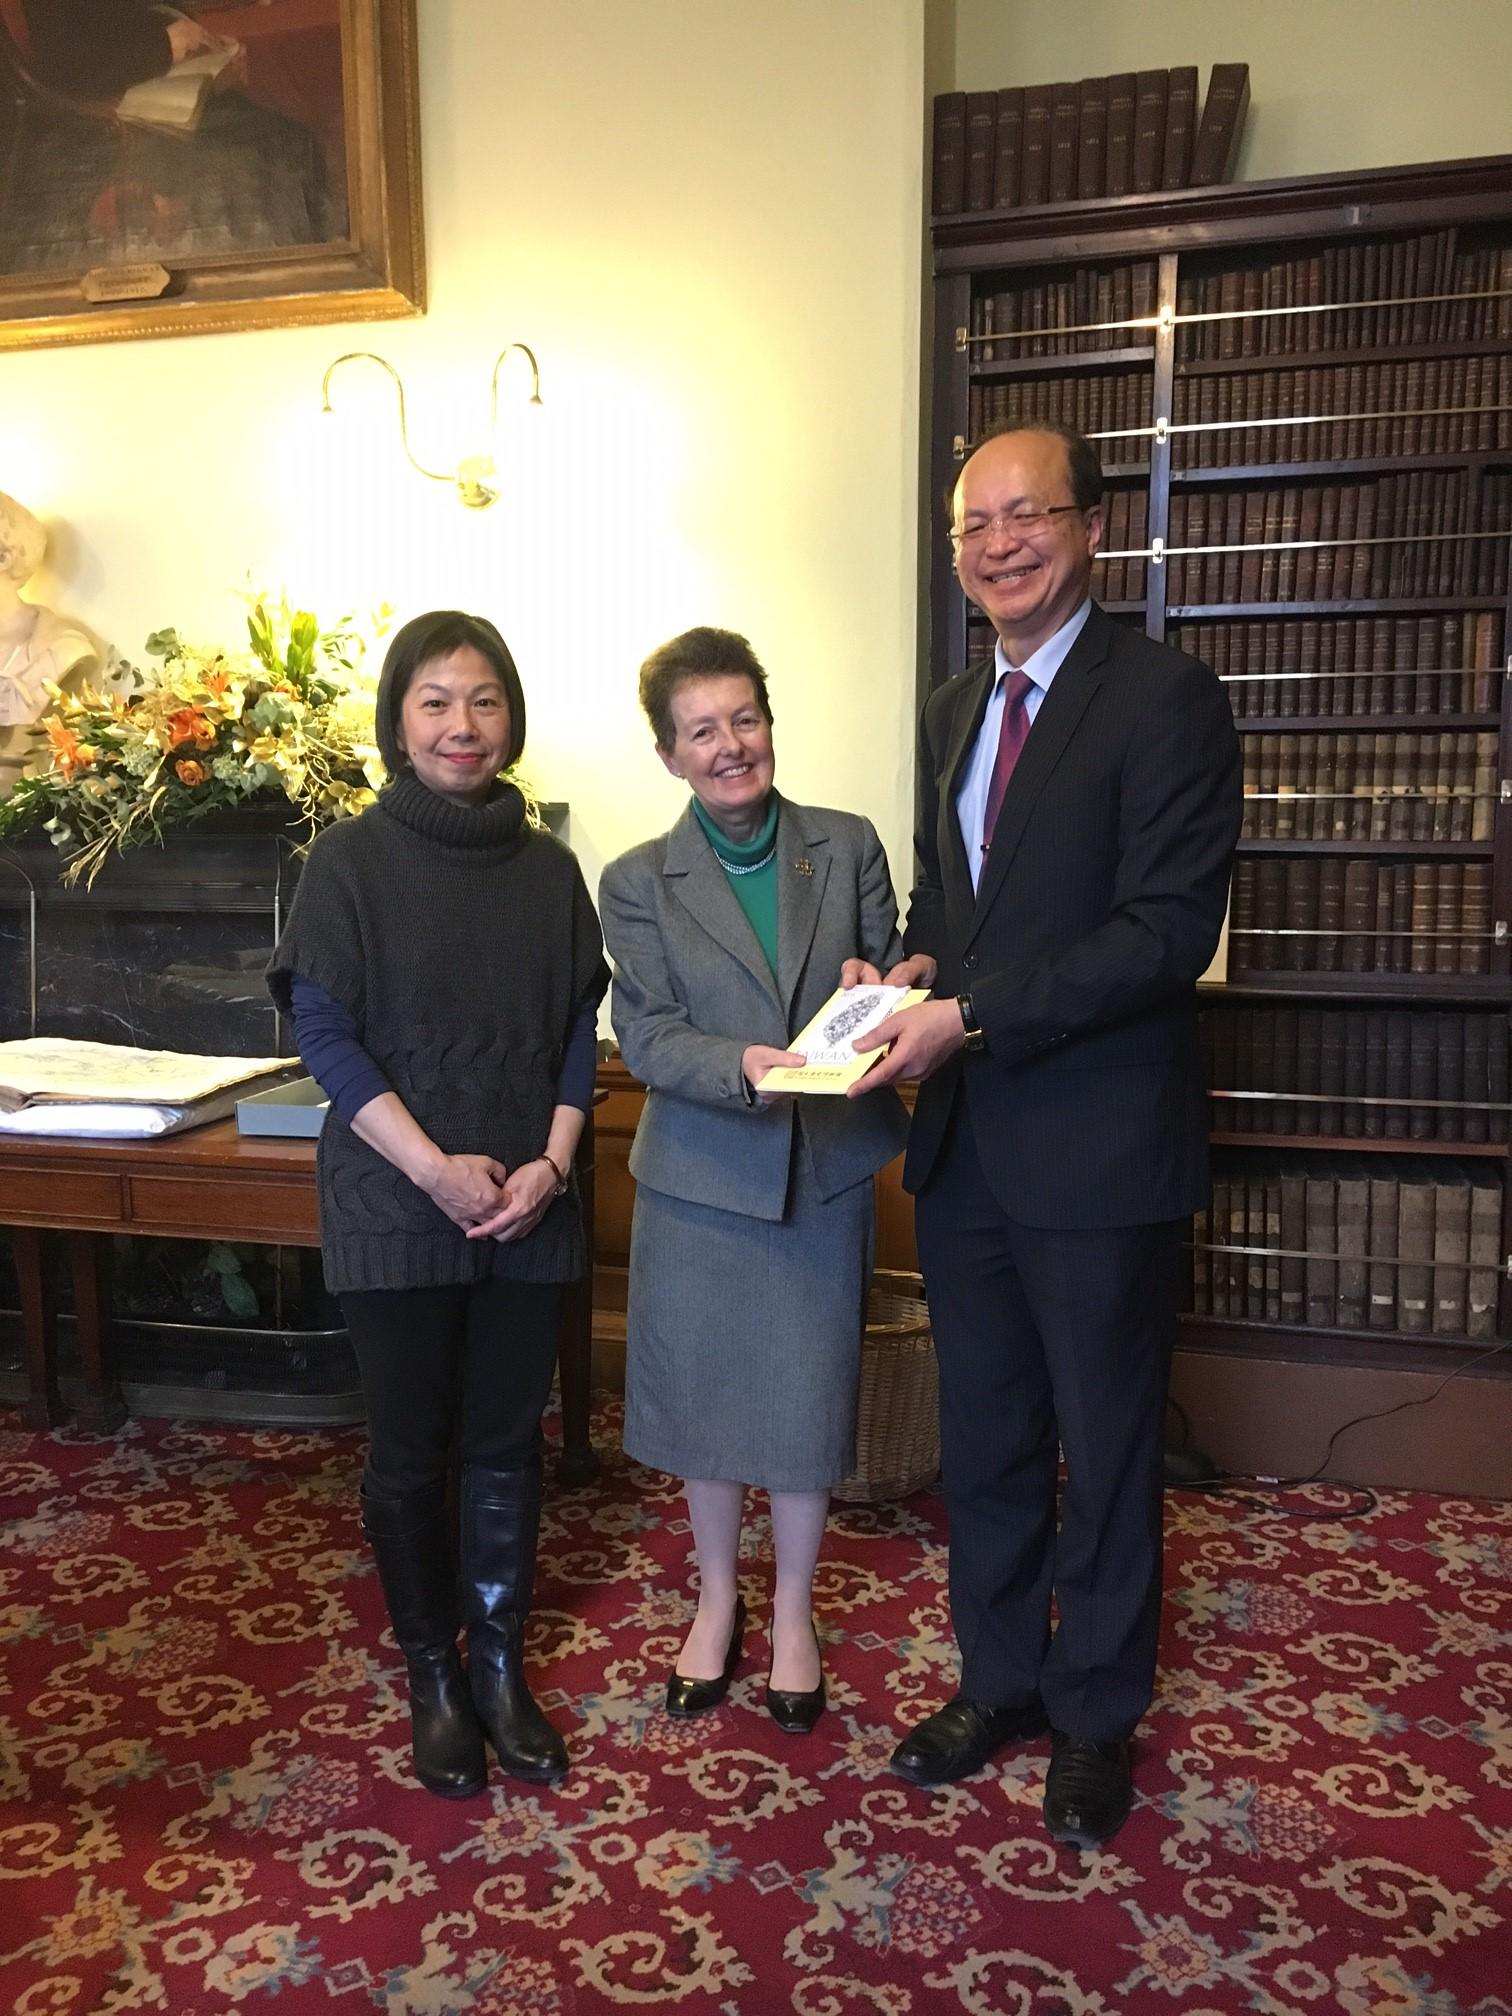 Representative Tu presenting a “Taiwan at a Glance” booklet to the Senior Librarian of the Royal Irish Academy, Ms Siobhán Fitzpatrick